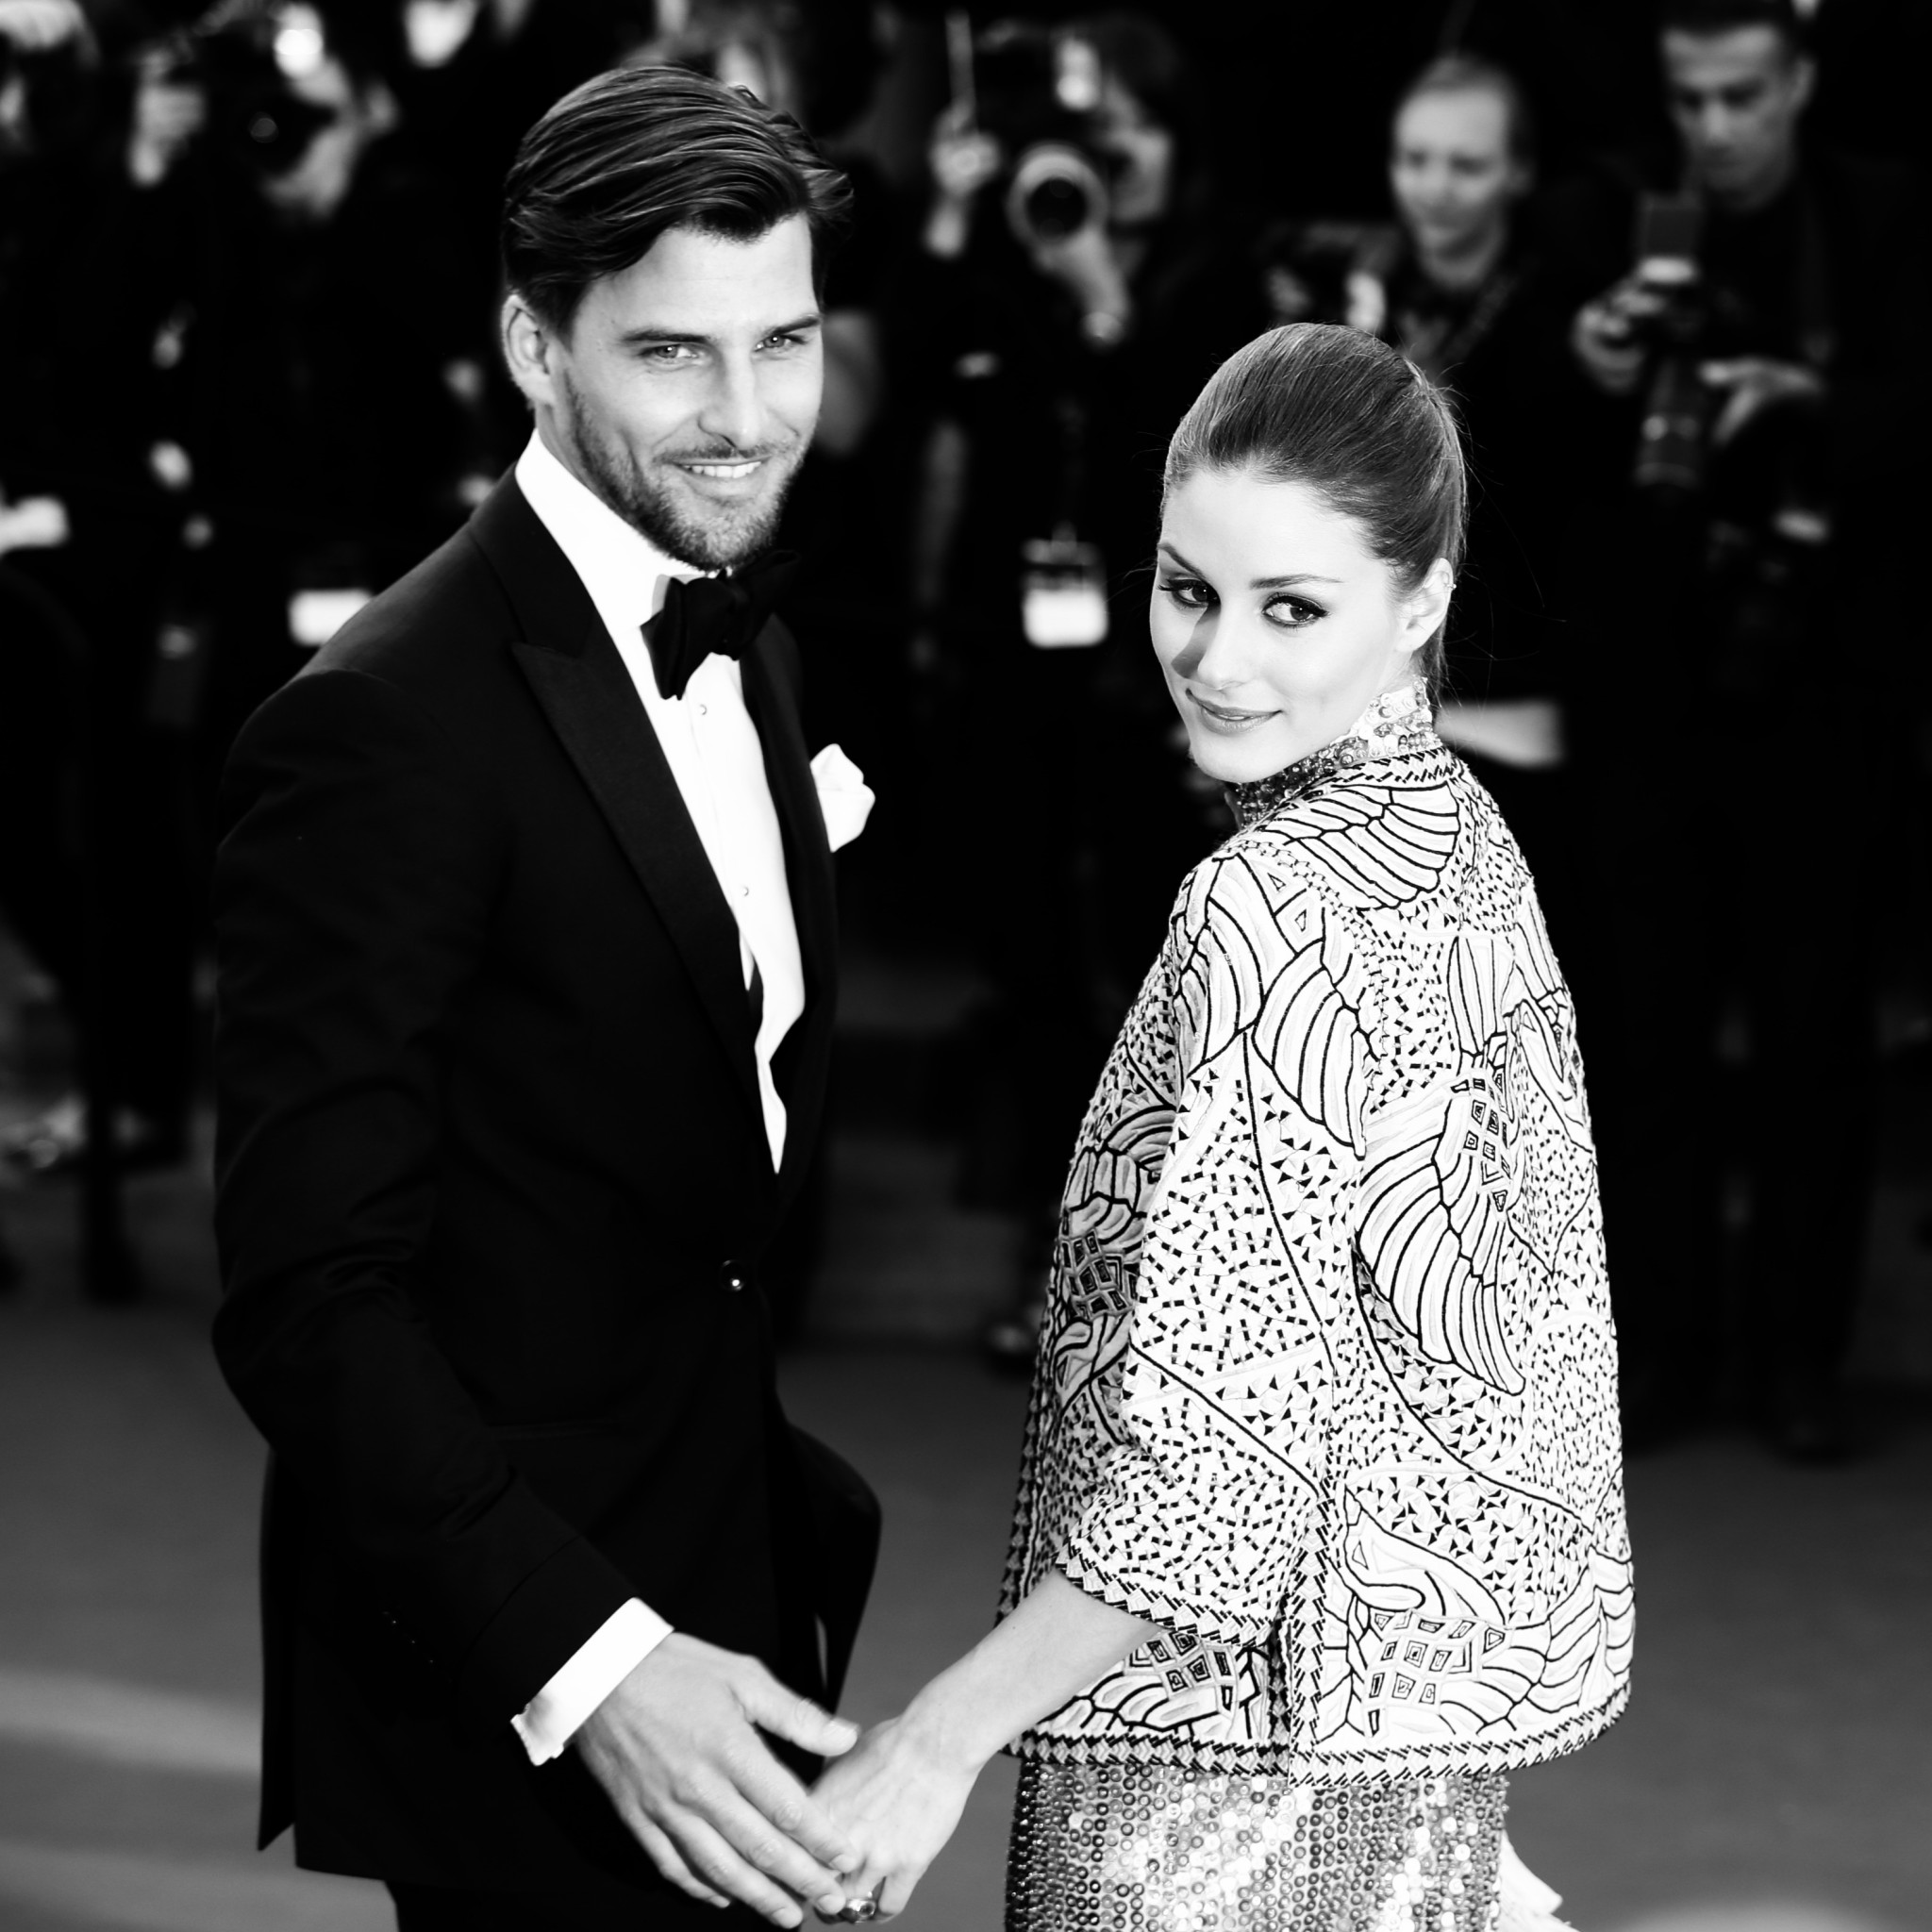 CANNES, FRANCE - MAY 24: (EDITORS NOTE: This image was processed using digital filters) Olivia Palermo and Johannes Huebl attend 'The Immigrant' Premiere during the 66th Annual Cannes Film Festival on May 24, 2013 in Cannes, France. (Photo by Vittorio Zunino Celotto/Getty Images)